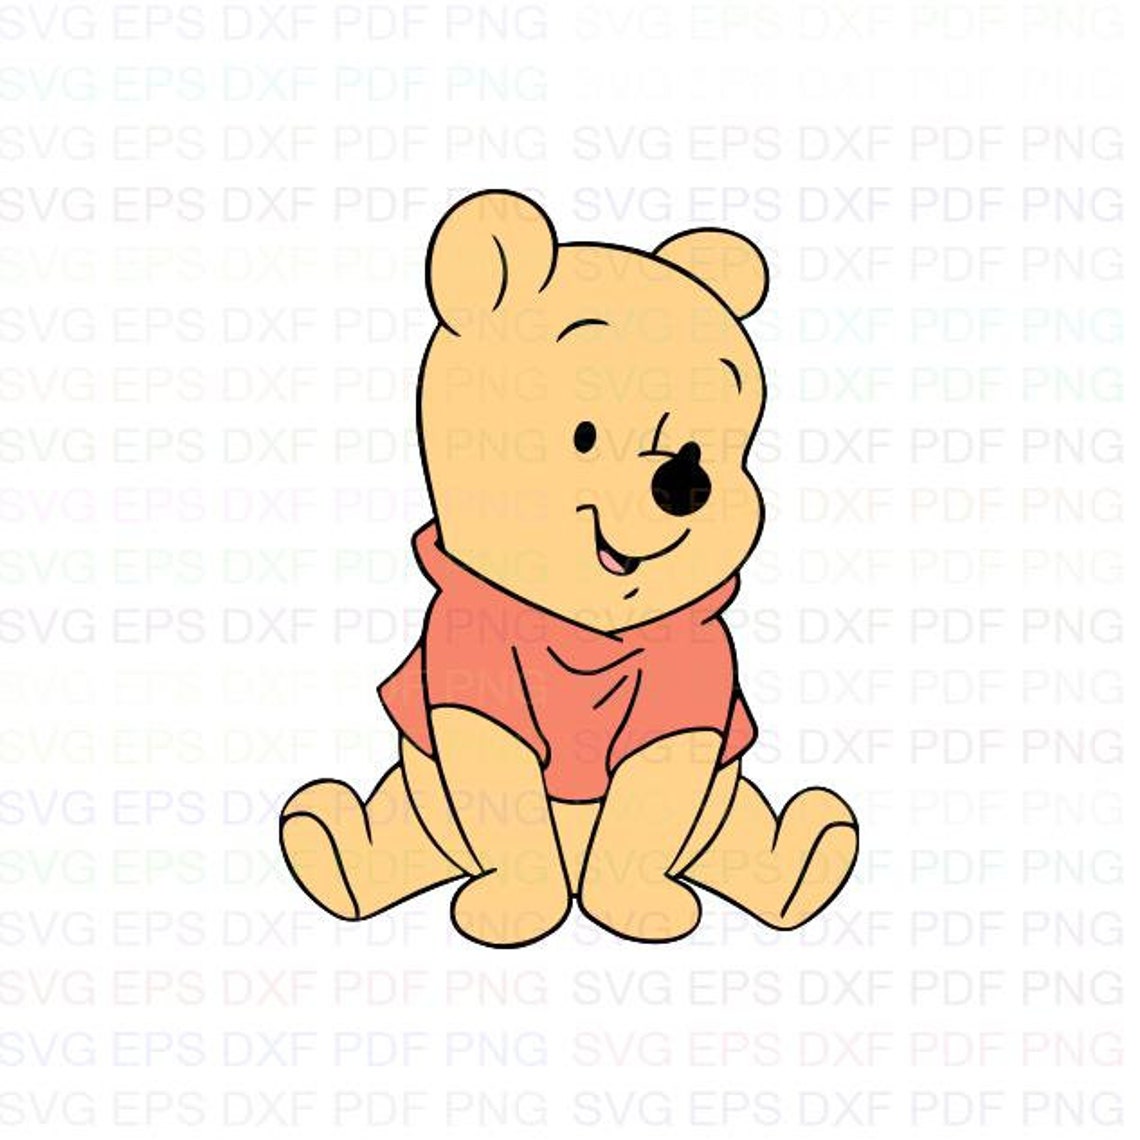 Download Baby Pooh 2 Winnie The Pooh Svg Dxf Eps Pdf Png Cricut | Etsy